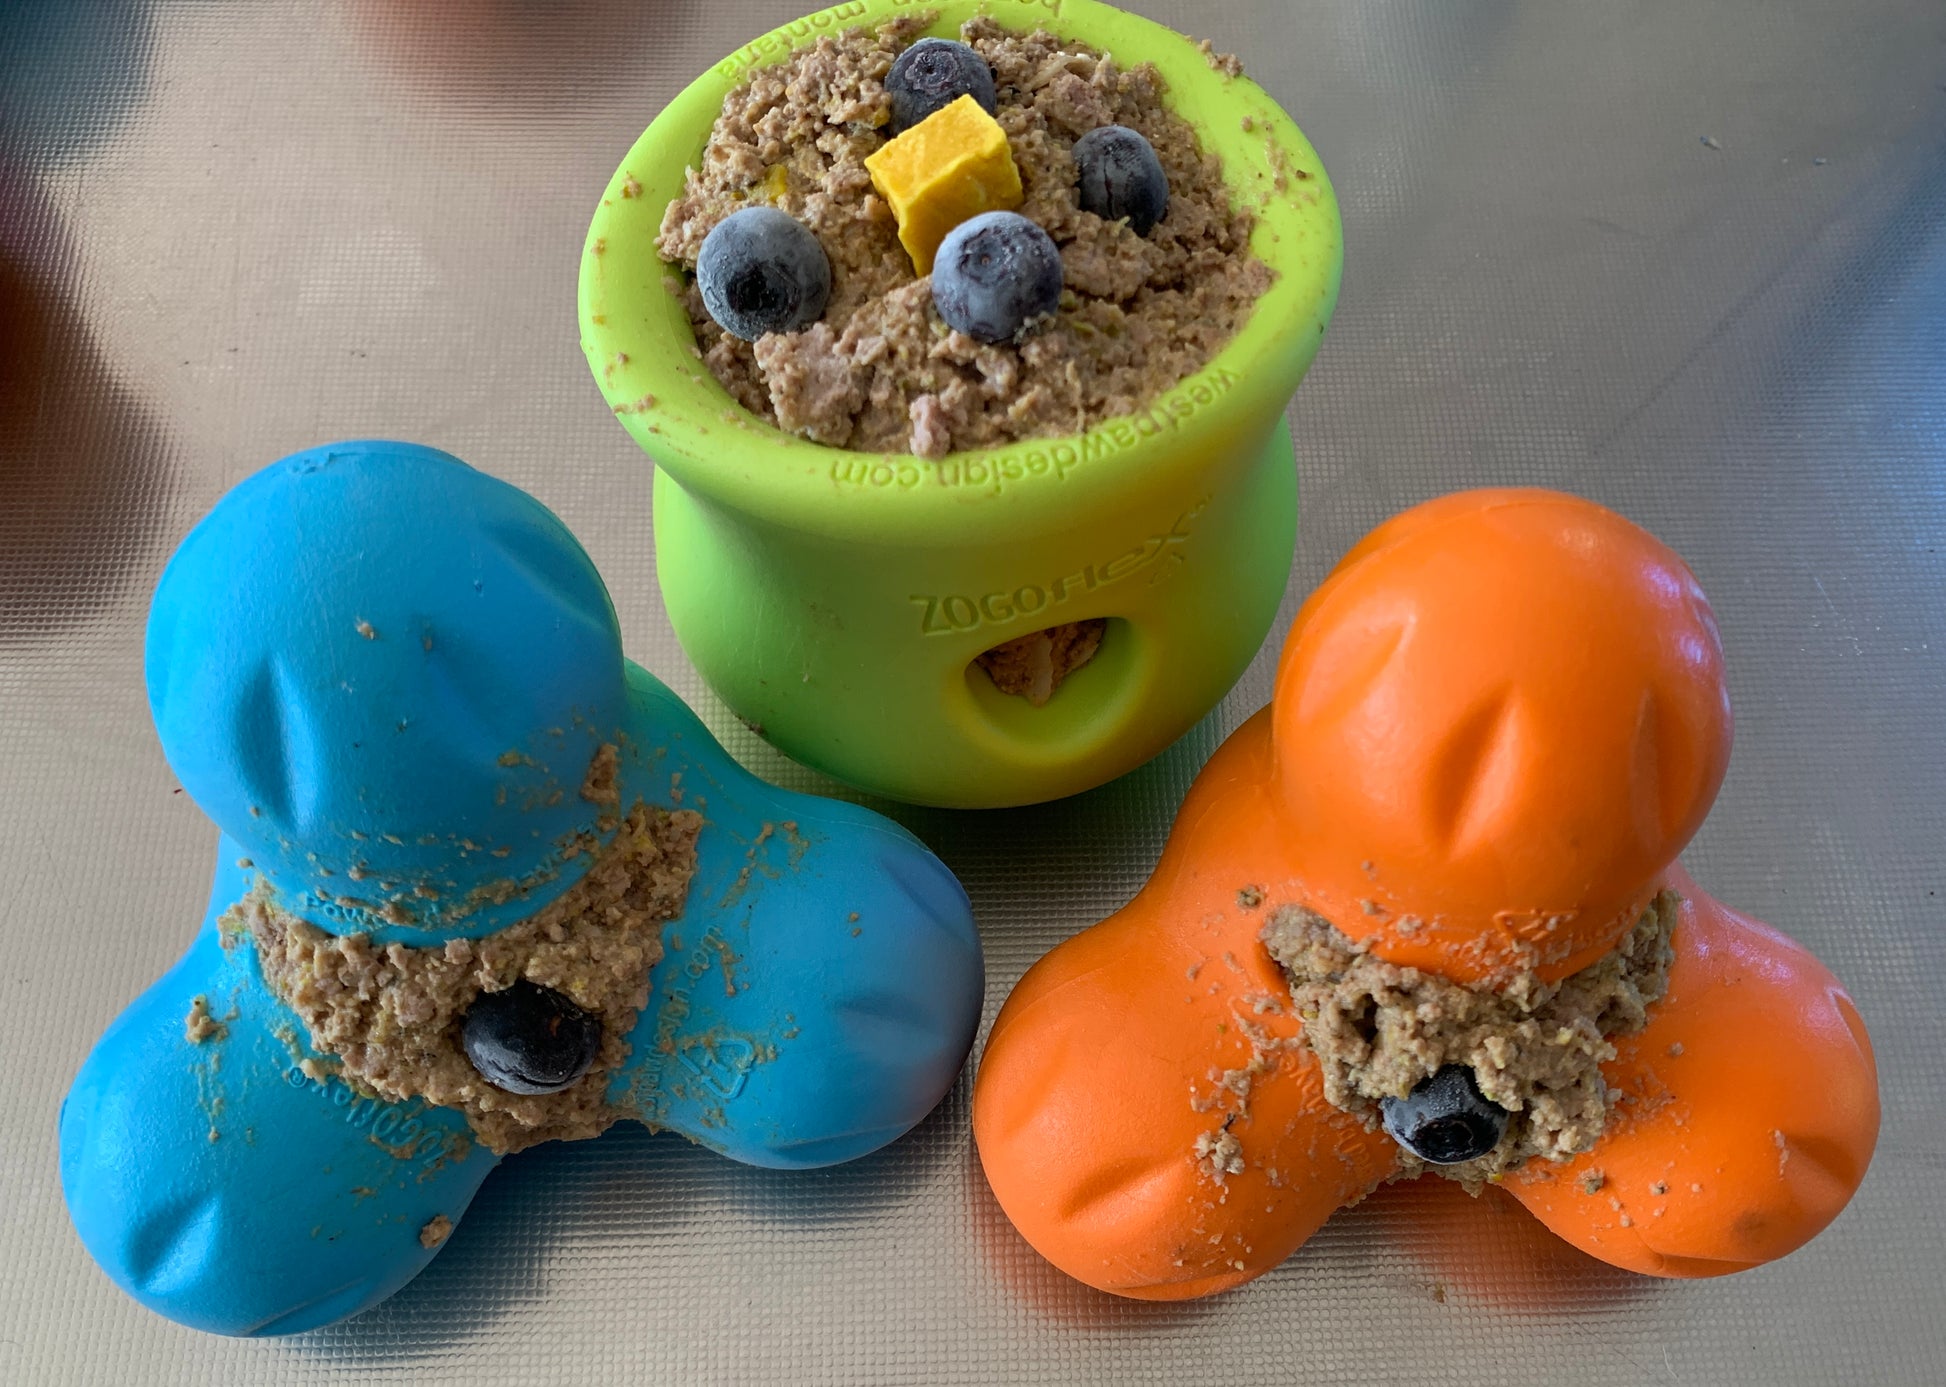 Three SALE: West Paw: Tux treat toys filled with treats on a surface.